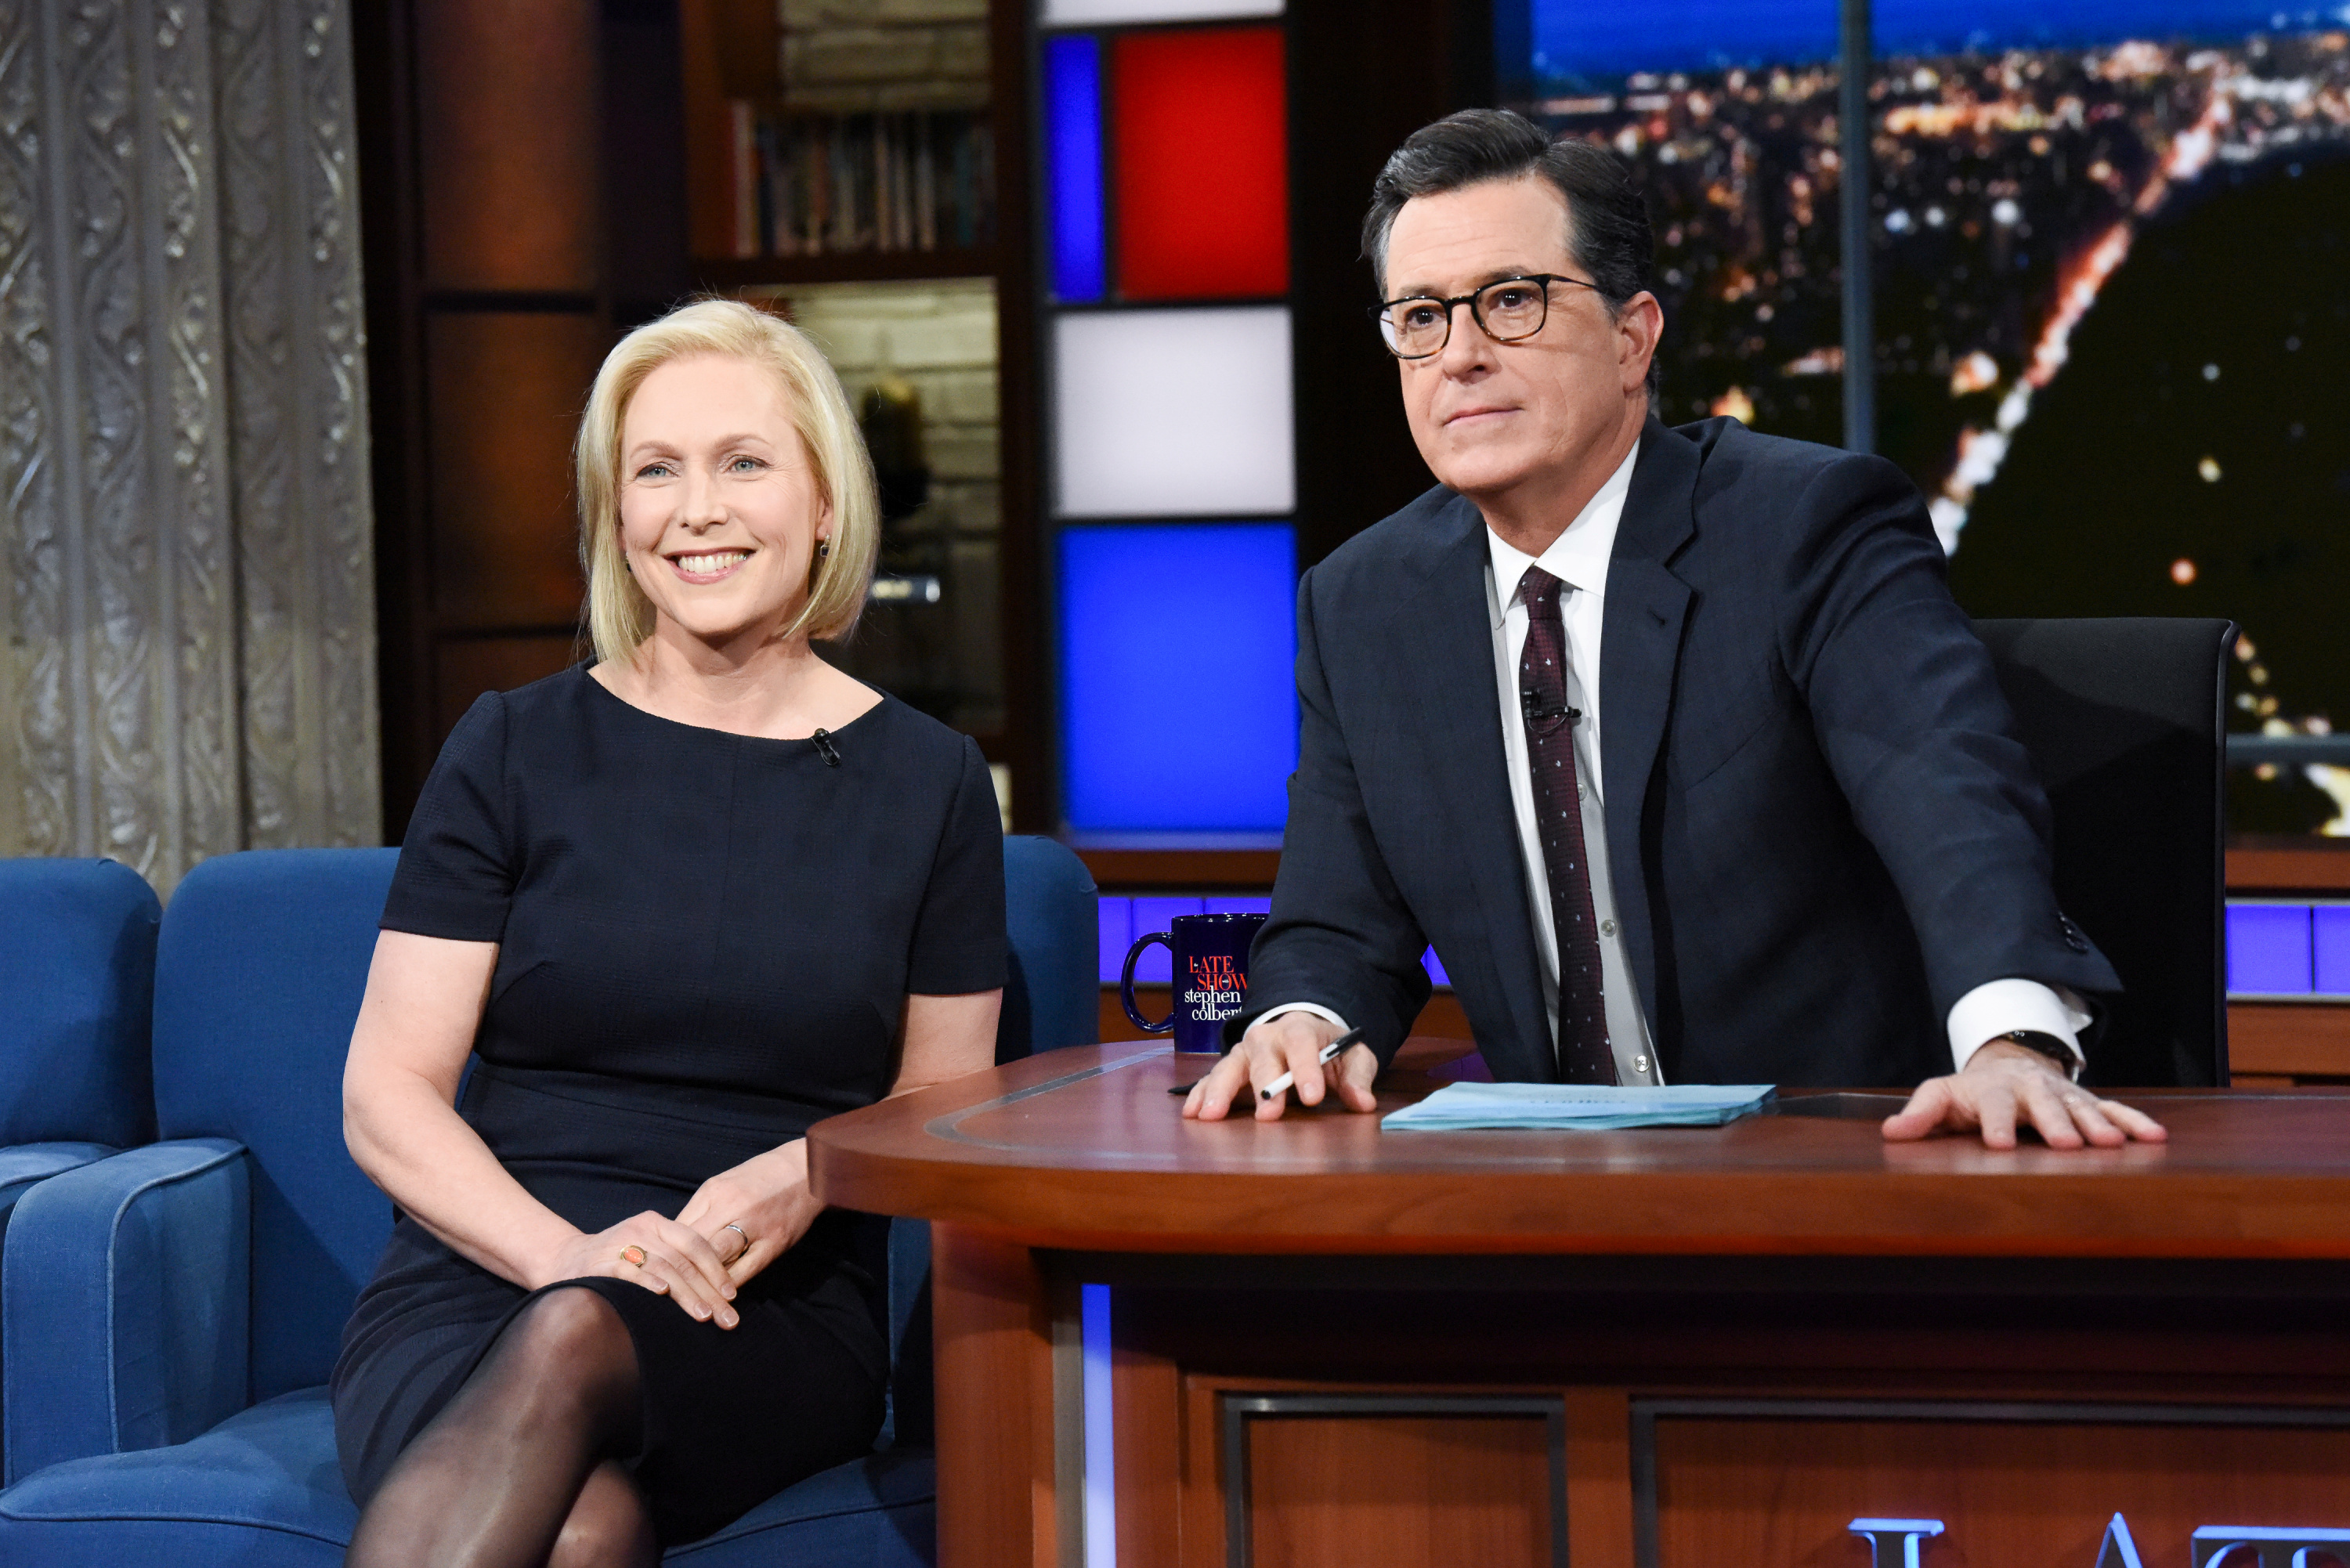 Senator Kirsten Gillibrand on the Late Show with Stephen Colbert in New York